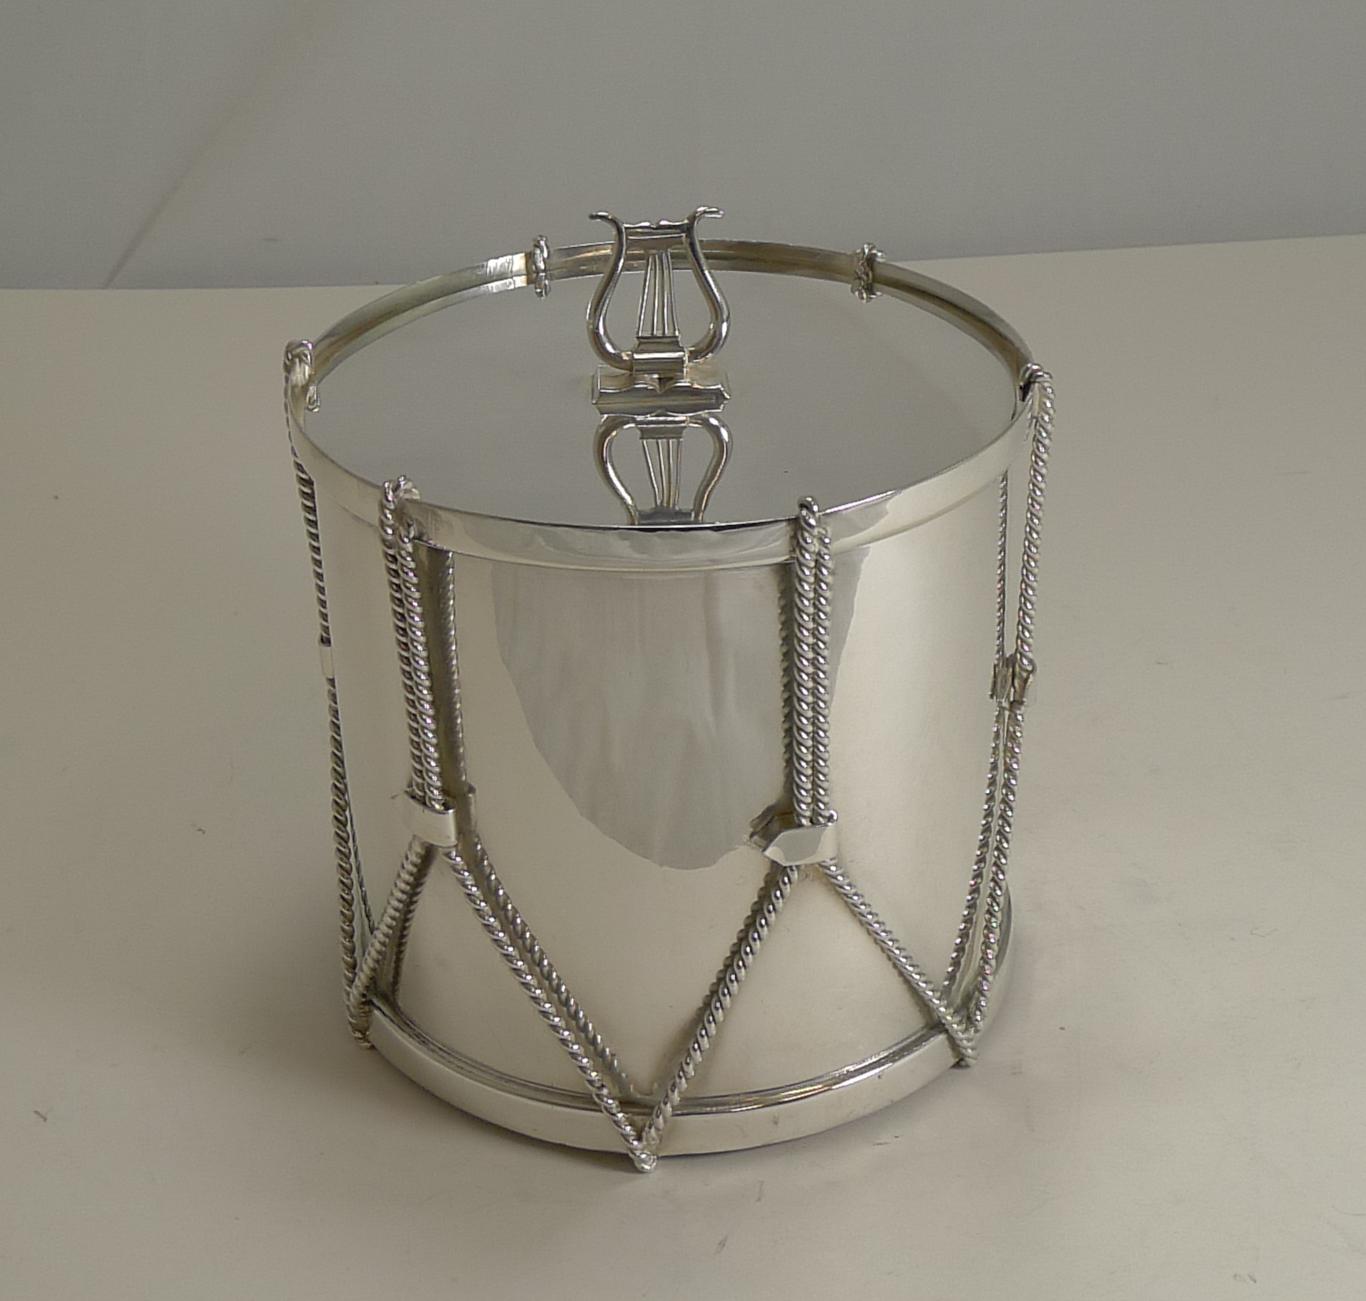 Late Victorian Antique English Novelty Biscuit Box Drum by Mappin & Webb, circa 1890